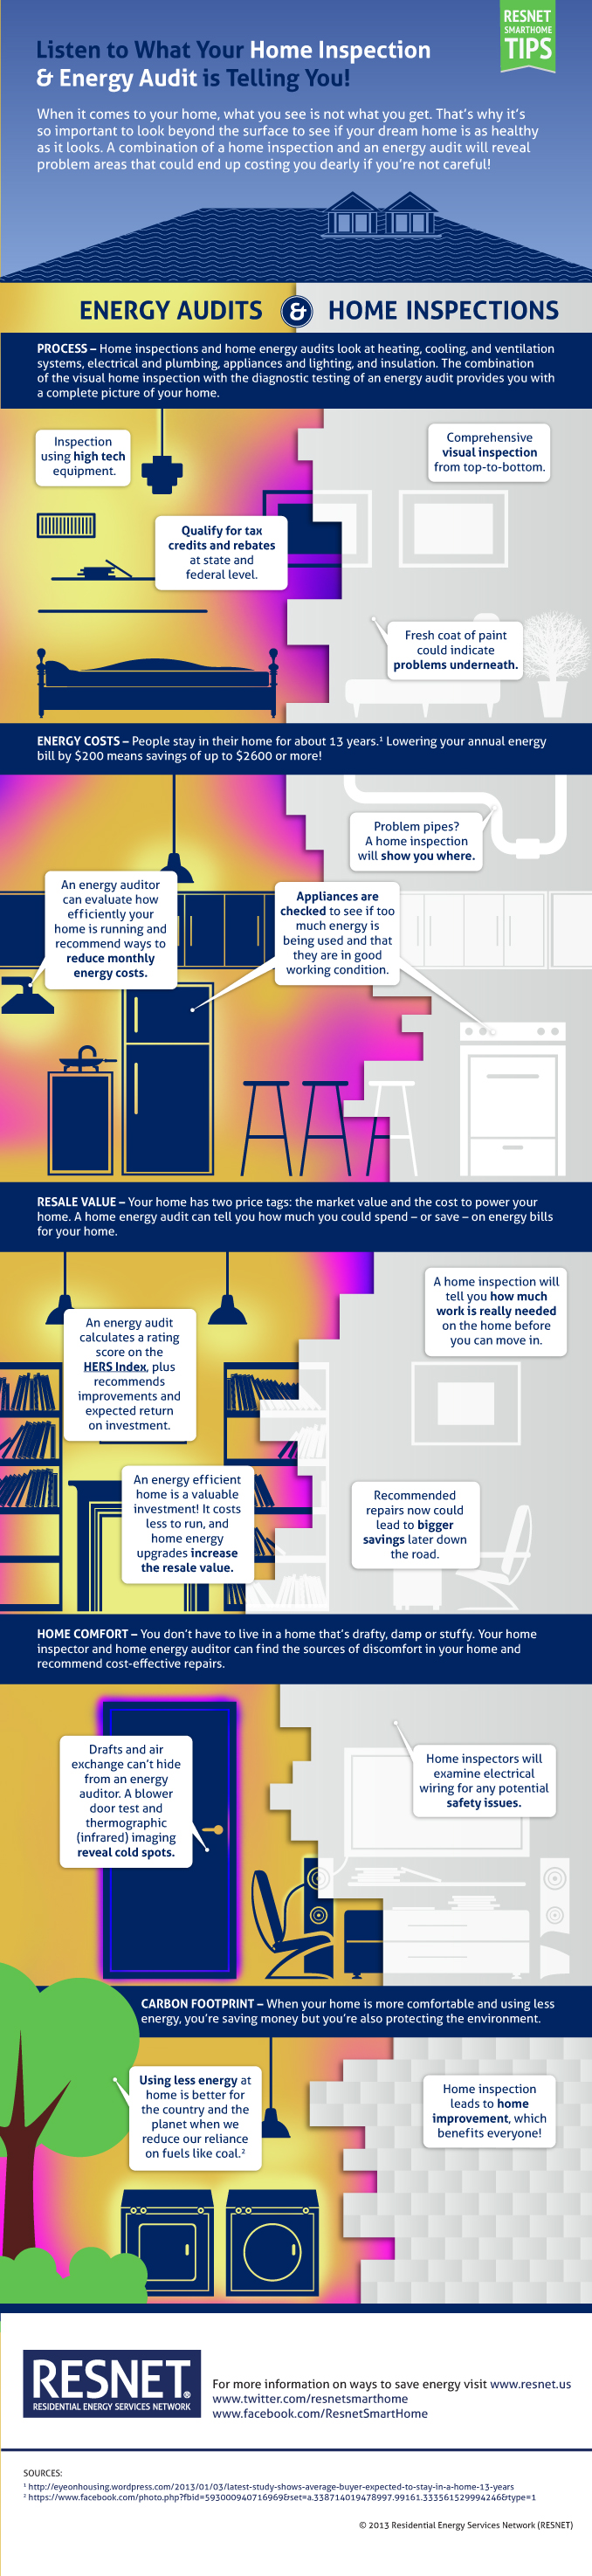 Home Inspection and Home Energy Audit Infographic